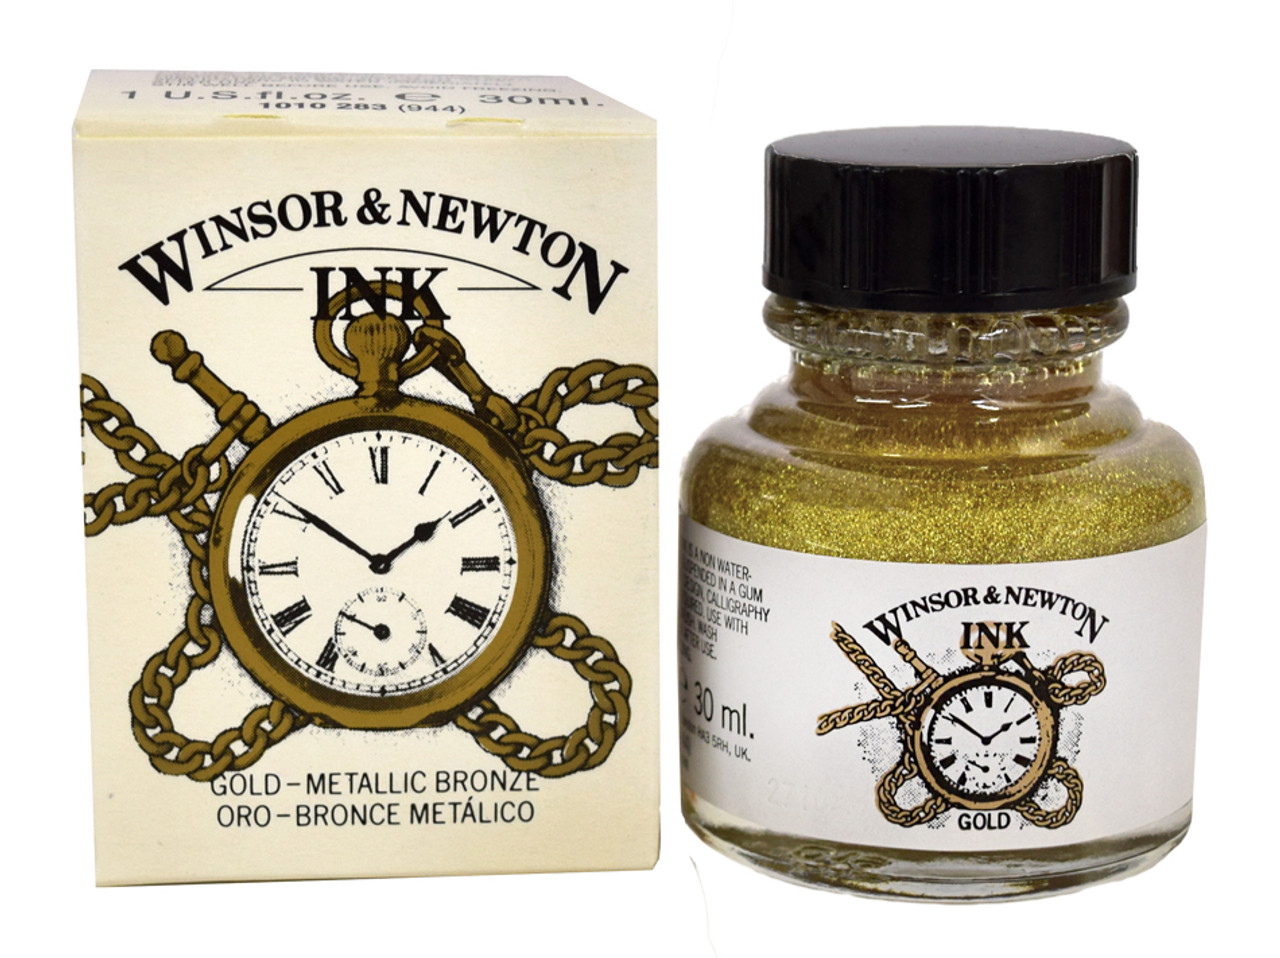 Winsor & Newton products for sale